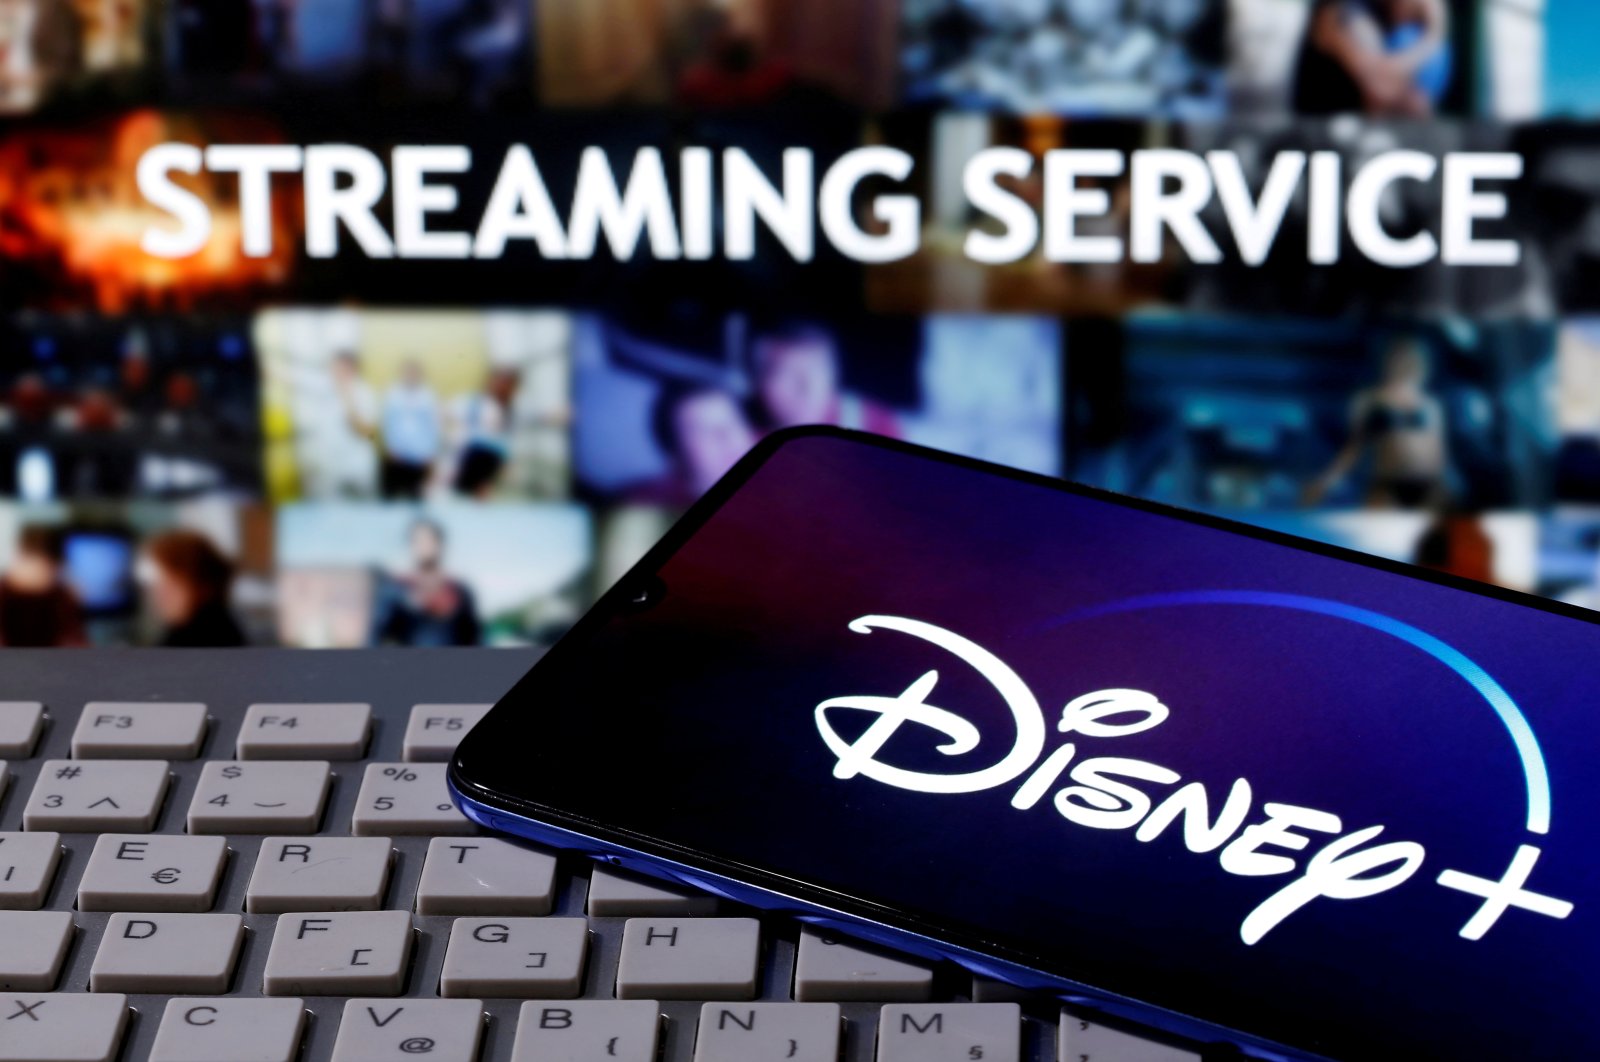 A smartphone with the "Disney" logo is seen on a keyboard in front of the words "Streaming service" in this picture illustration taken March 24, 2020. (REUTERS Photo)